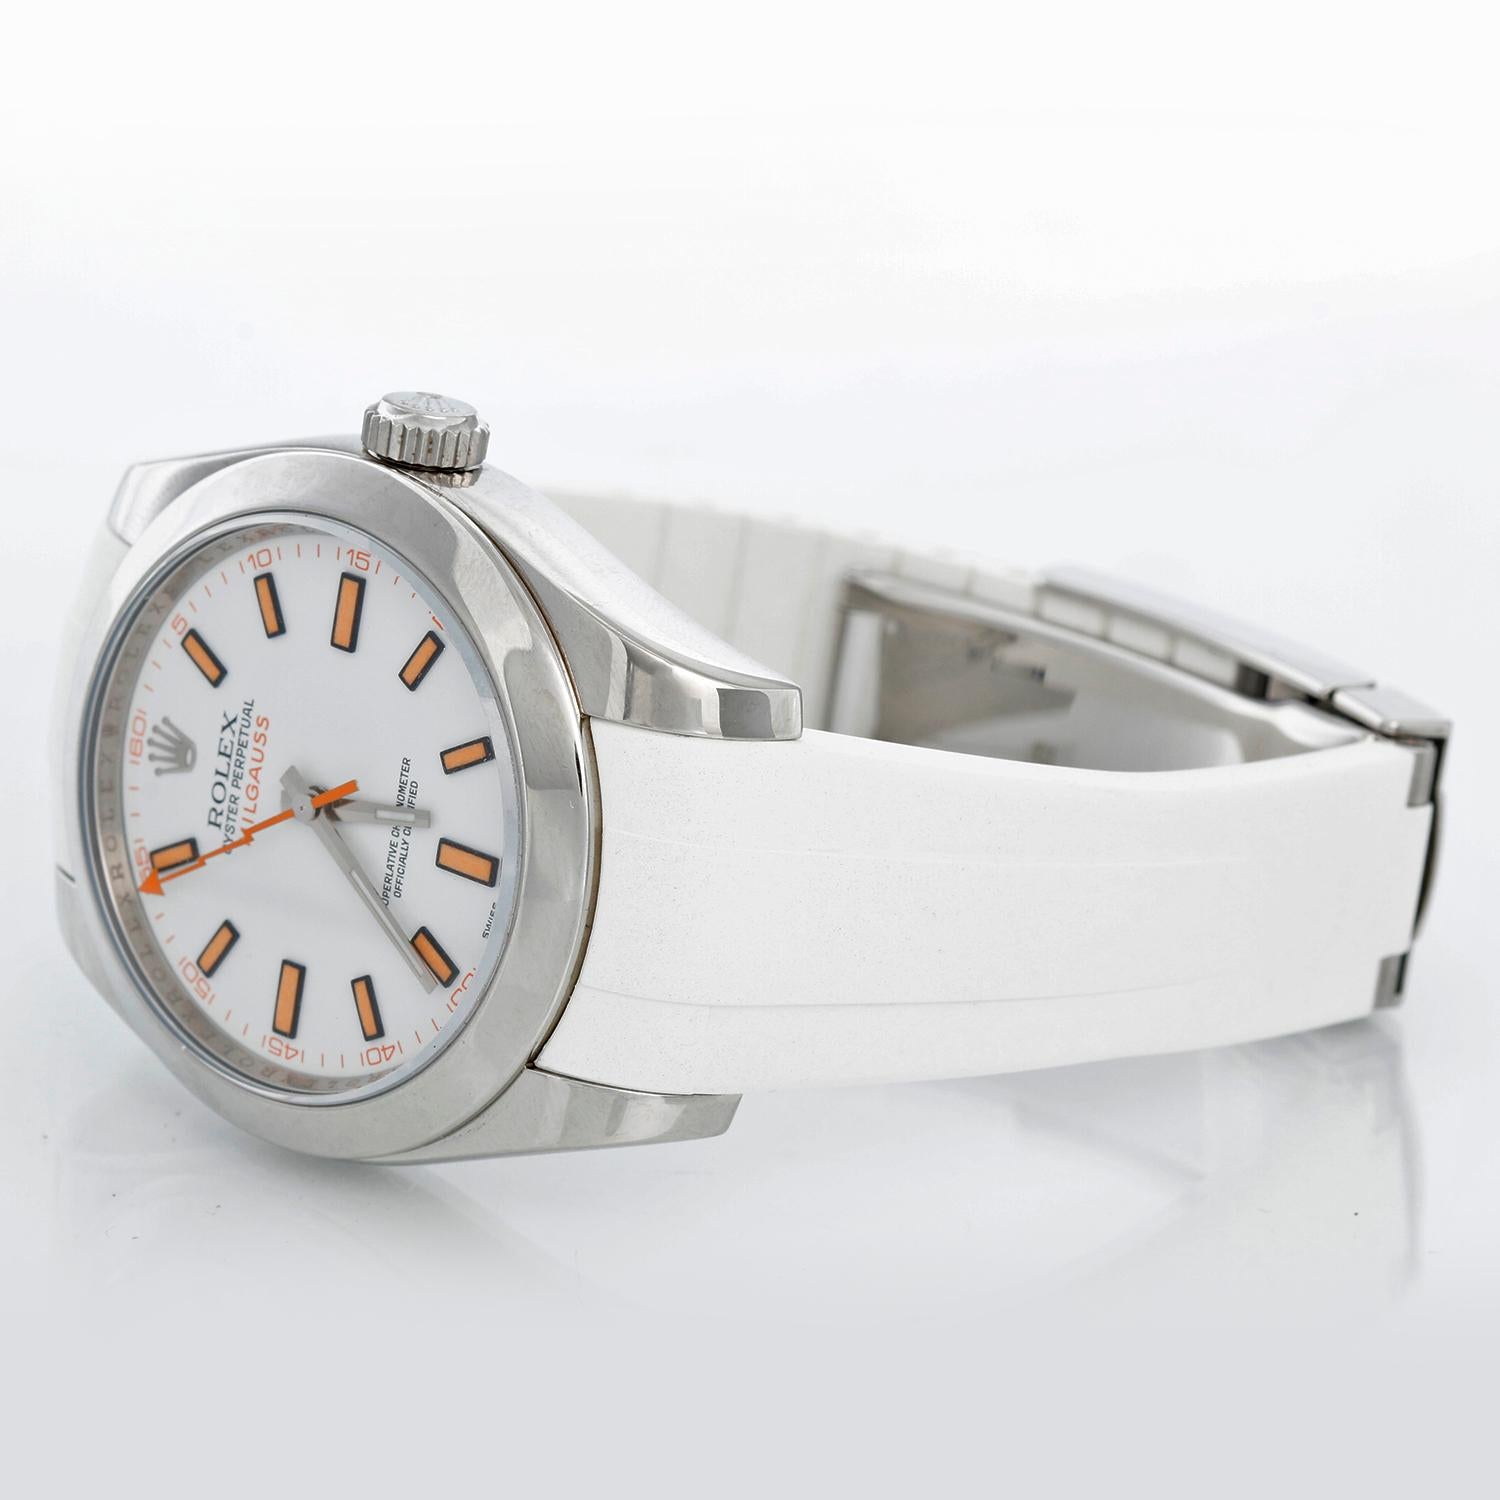 Rolex Milgauss Stainless Steel Men's Watch White Dial 116400 - Automatic winding, sapphire crystal, 31 jewels. Stainless steel case with smooth bezel (40mm diameter). White dial with luminous-style orange markers. White Rubber B Strap with with